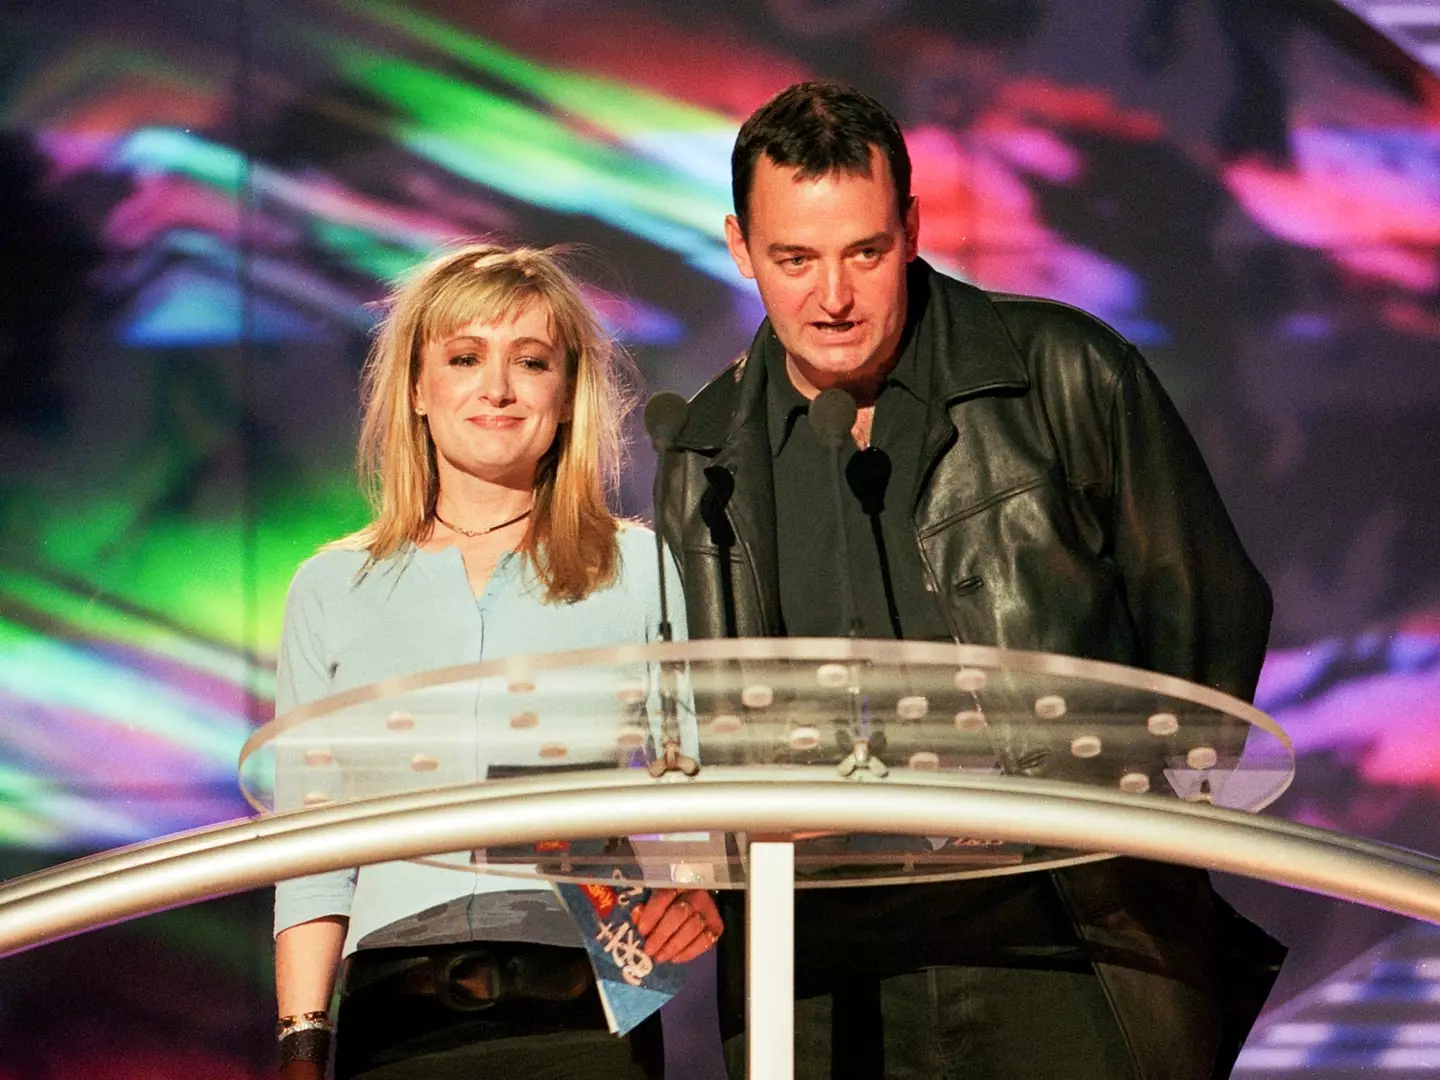 Craig and Caroline remained close throughout their careers and lives.